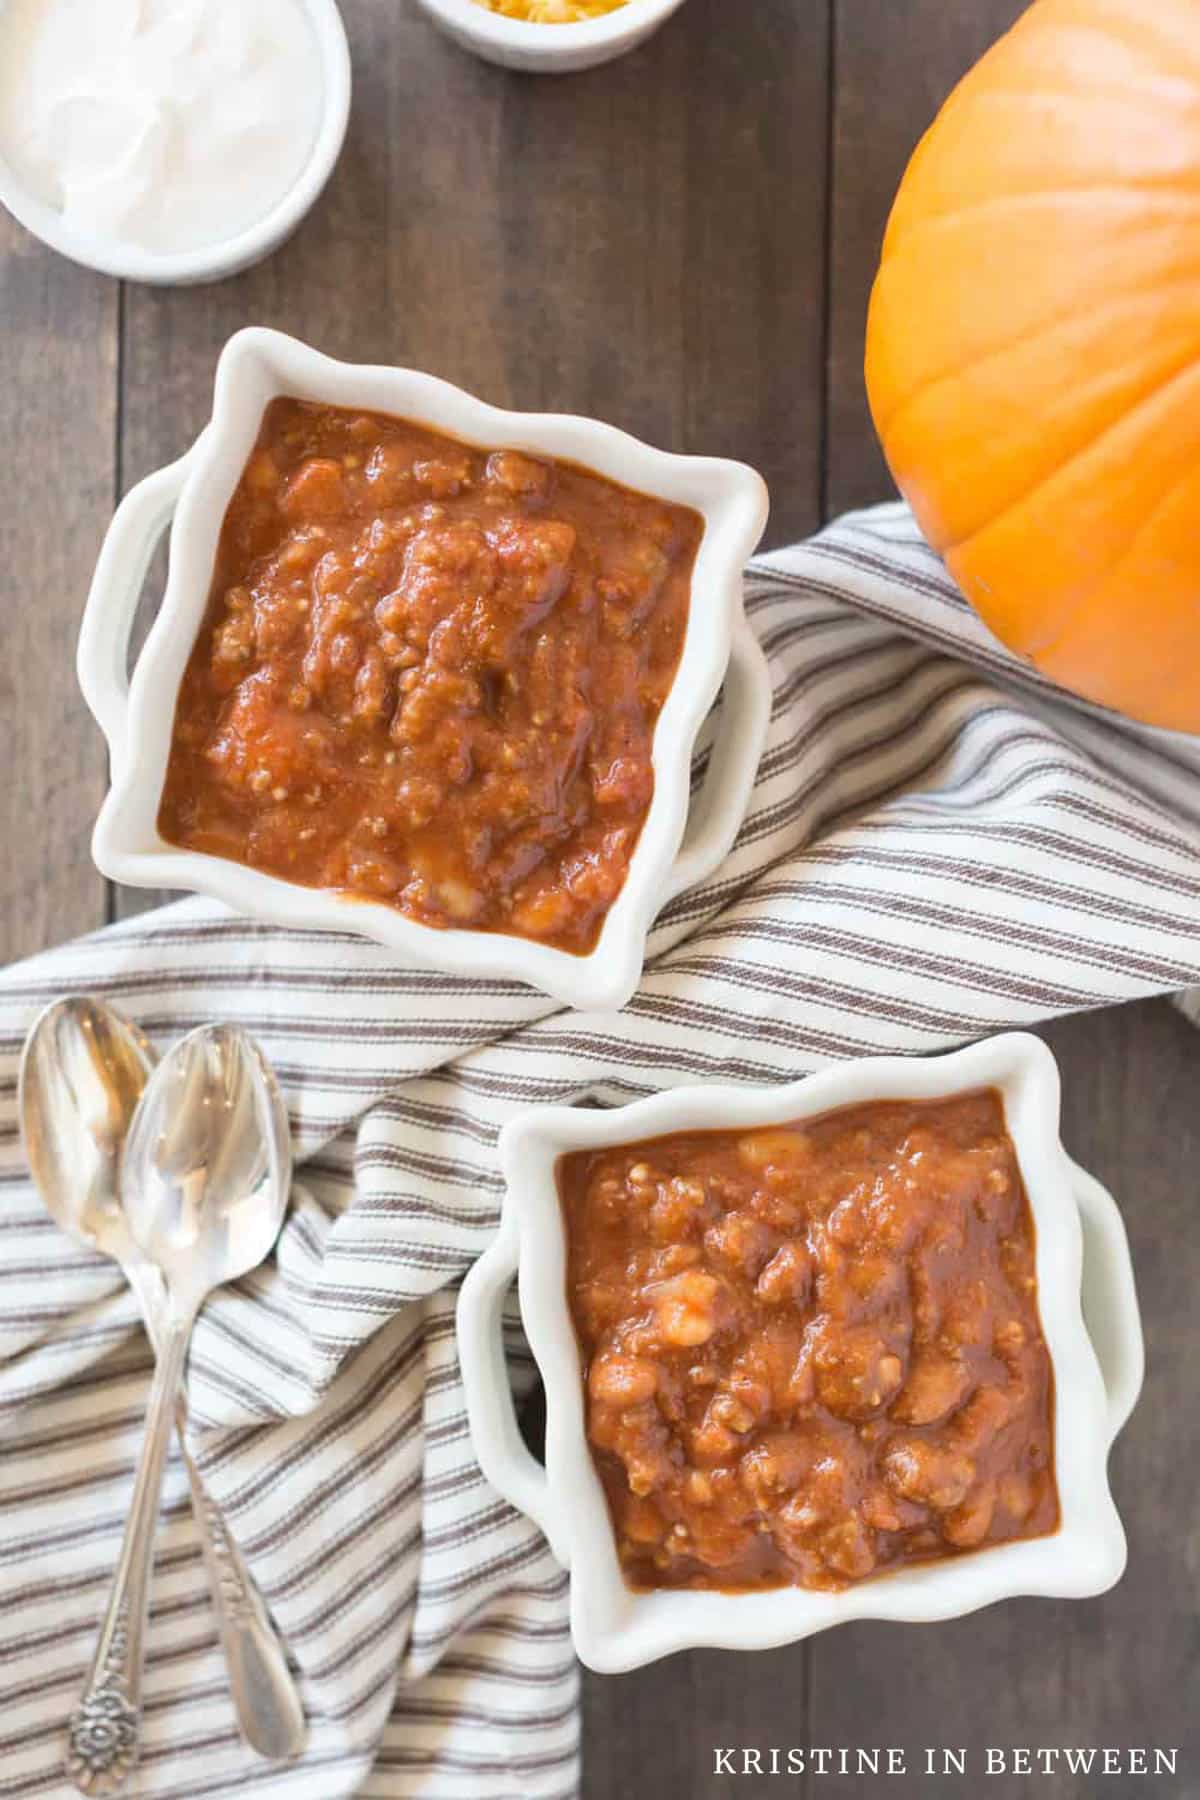 Two bowls of pumpkin chili with a small pumpkin and a brown striped napkin sitting next to them.